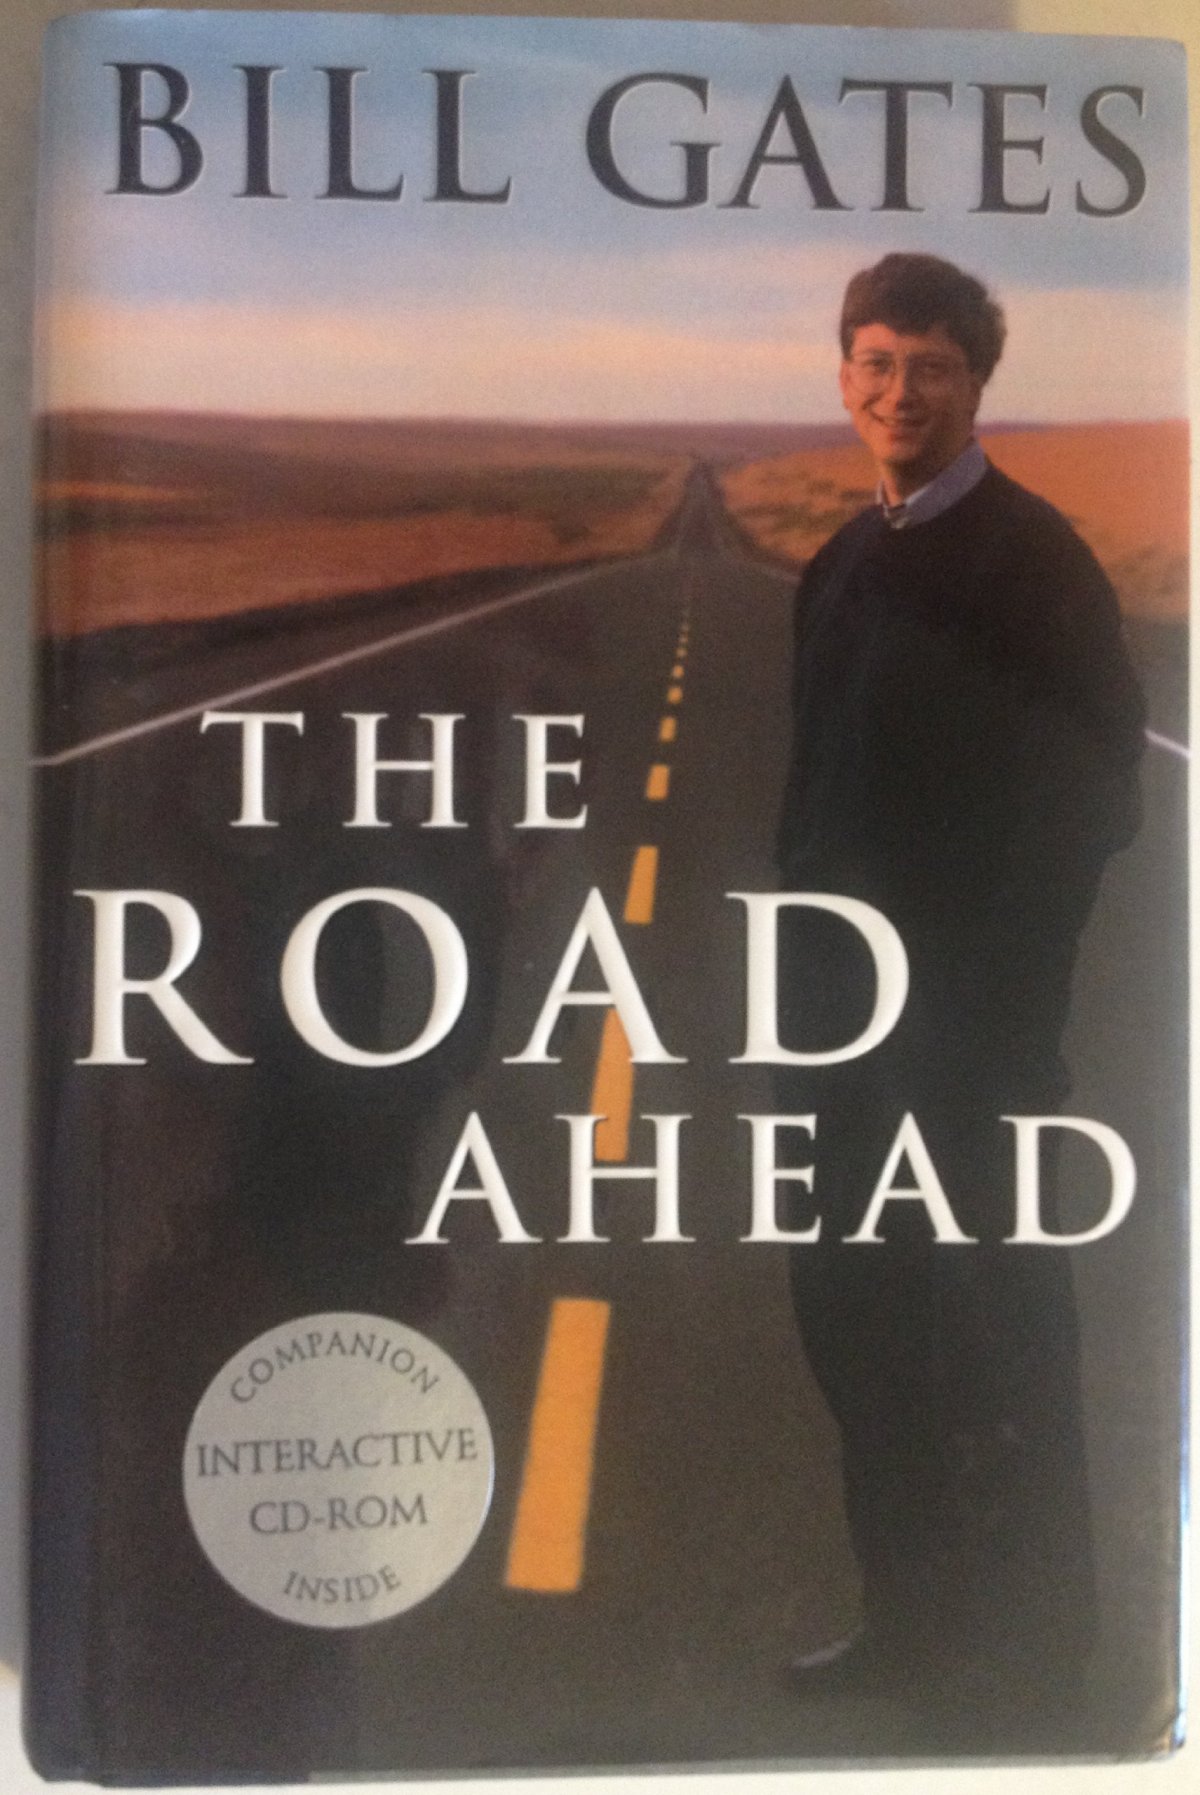 still-despite-his-famed-long-term-vision-gates-didnt-get-everything-right-the-hardcover-version-of-his-1995-book-the-road-ahead-discounted-the-potential-of-the-internet--a-position-he-fixed-and-addres (1)